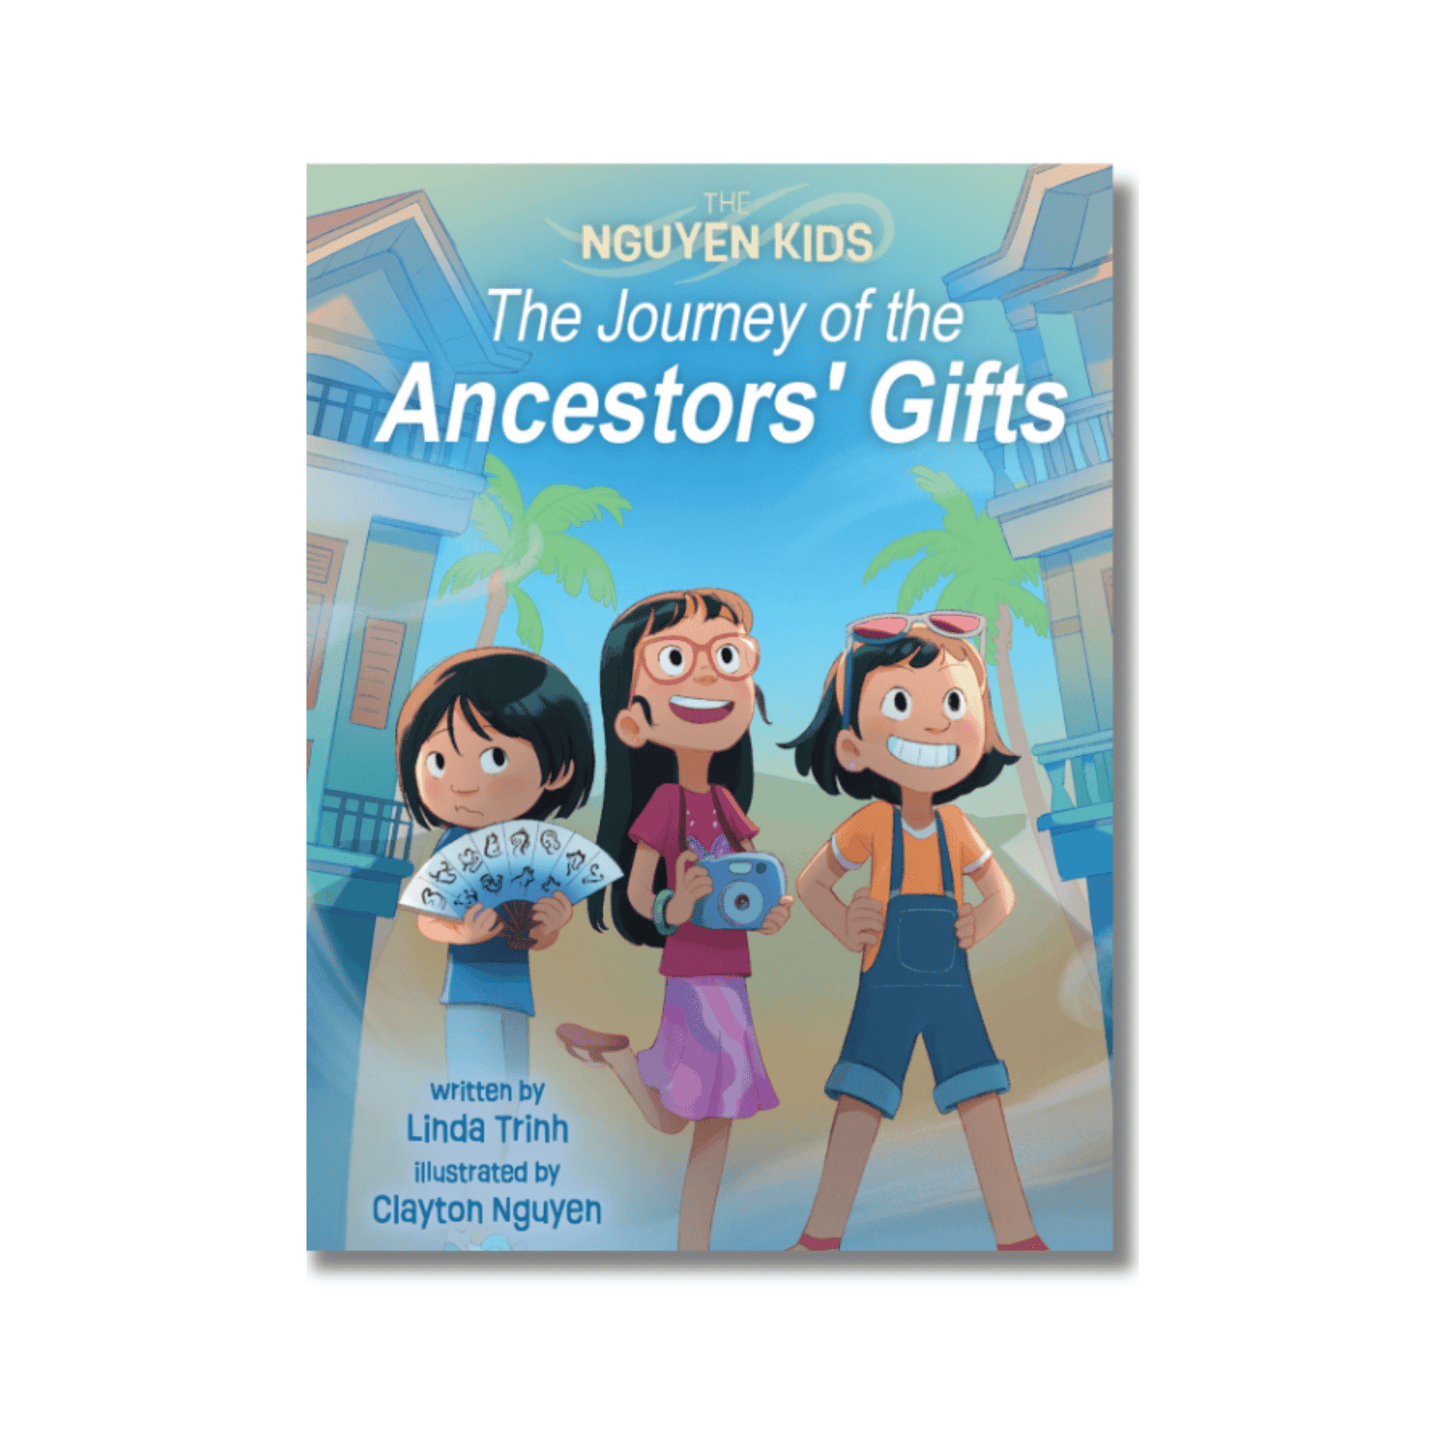 The Ngyuyen Kids - The Journey of the Ancestors’ Gifts